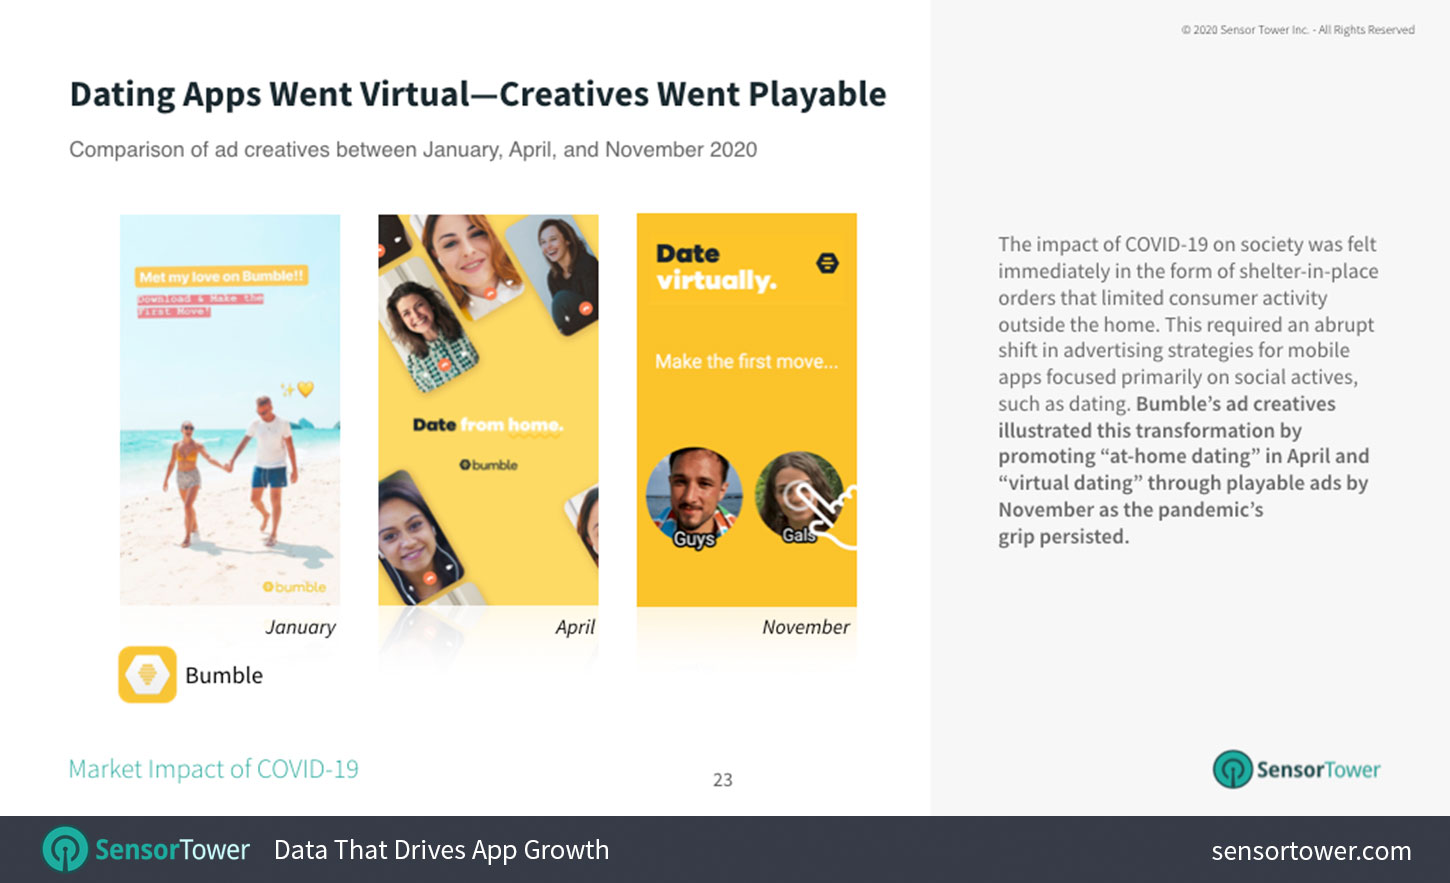 From January to November, dating app creatives evolved to include more playable ads.